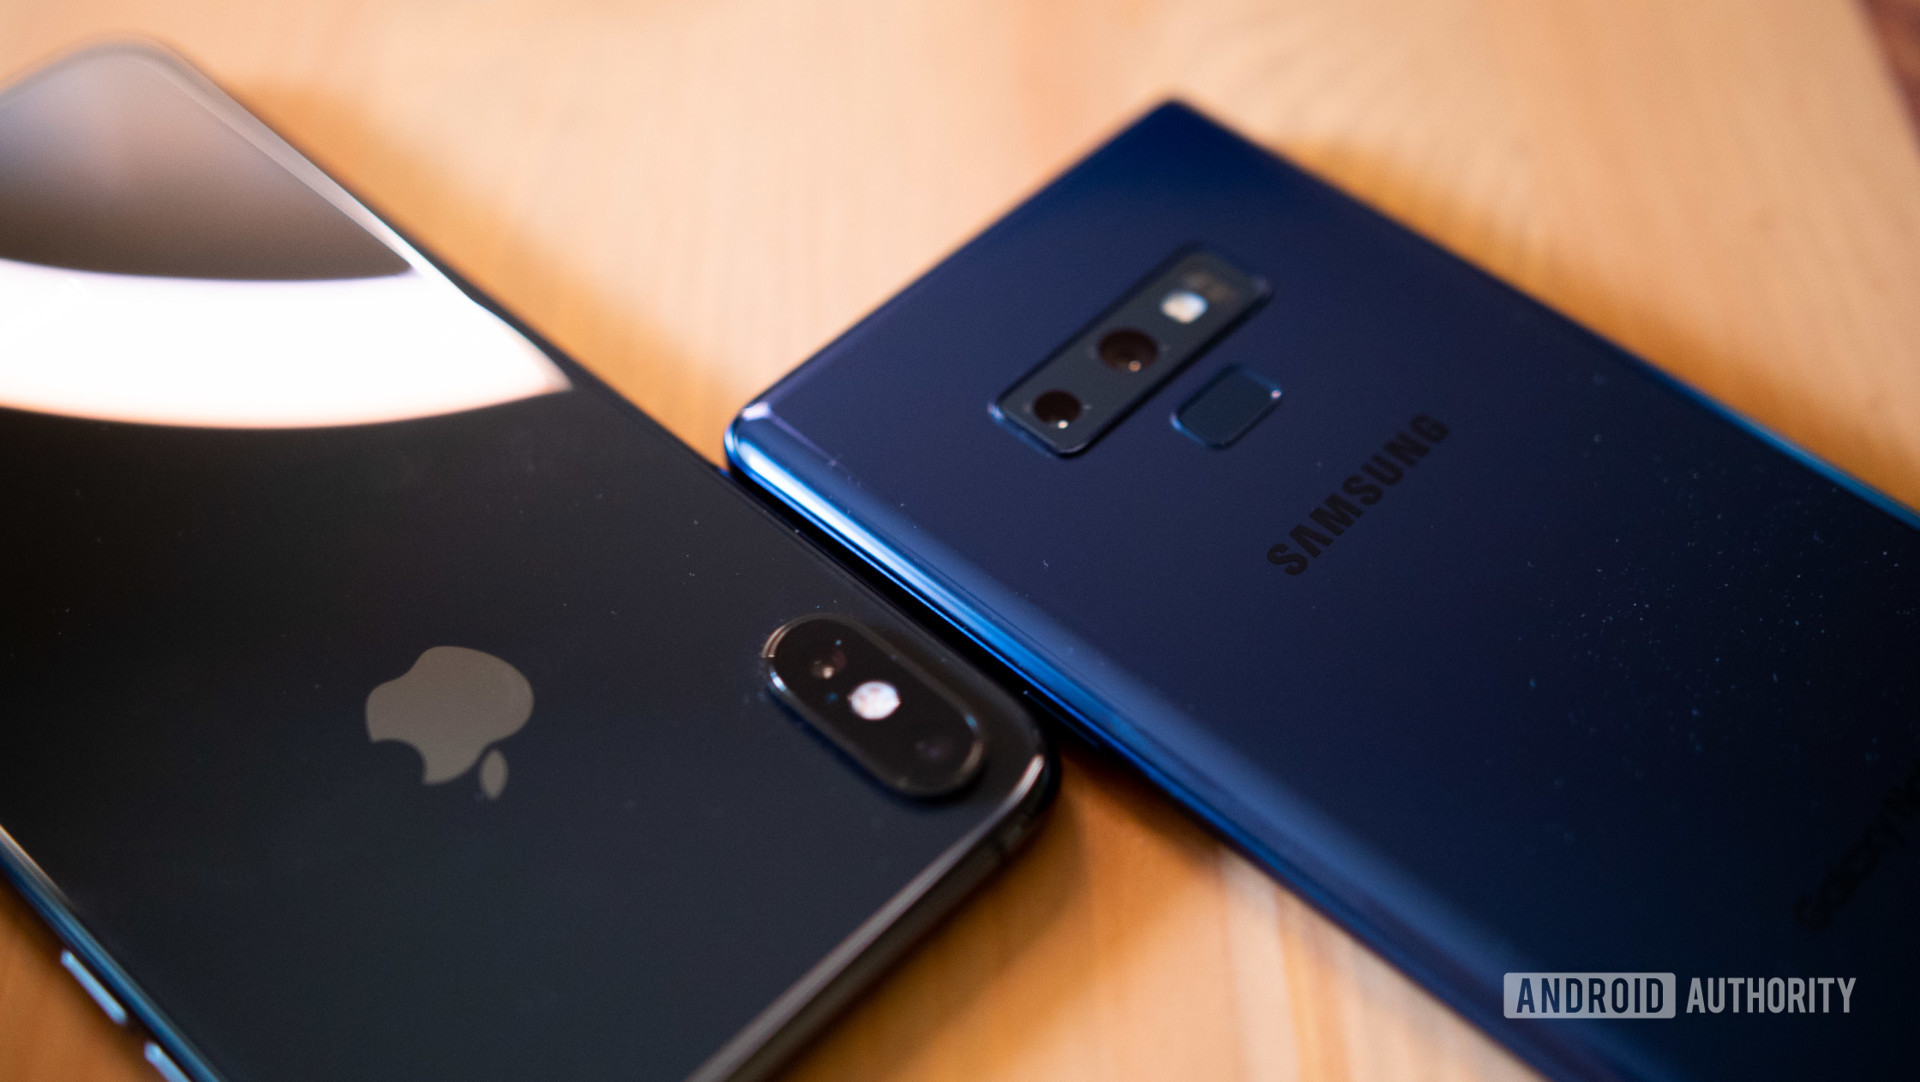 Apple vs Samsung: the Galaxy Note 9 and the iPhone XS Max face down on a table.